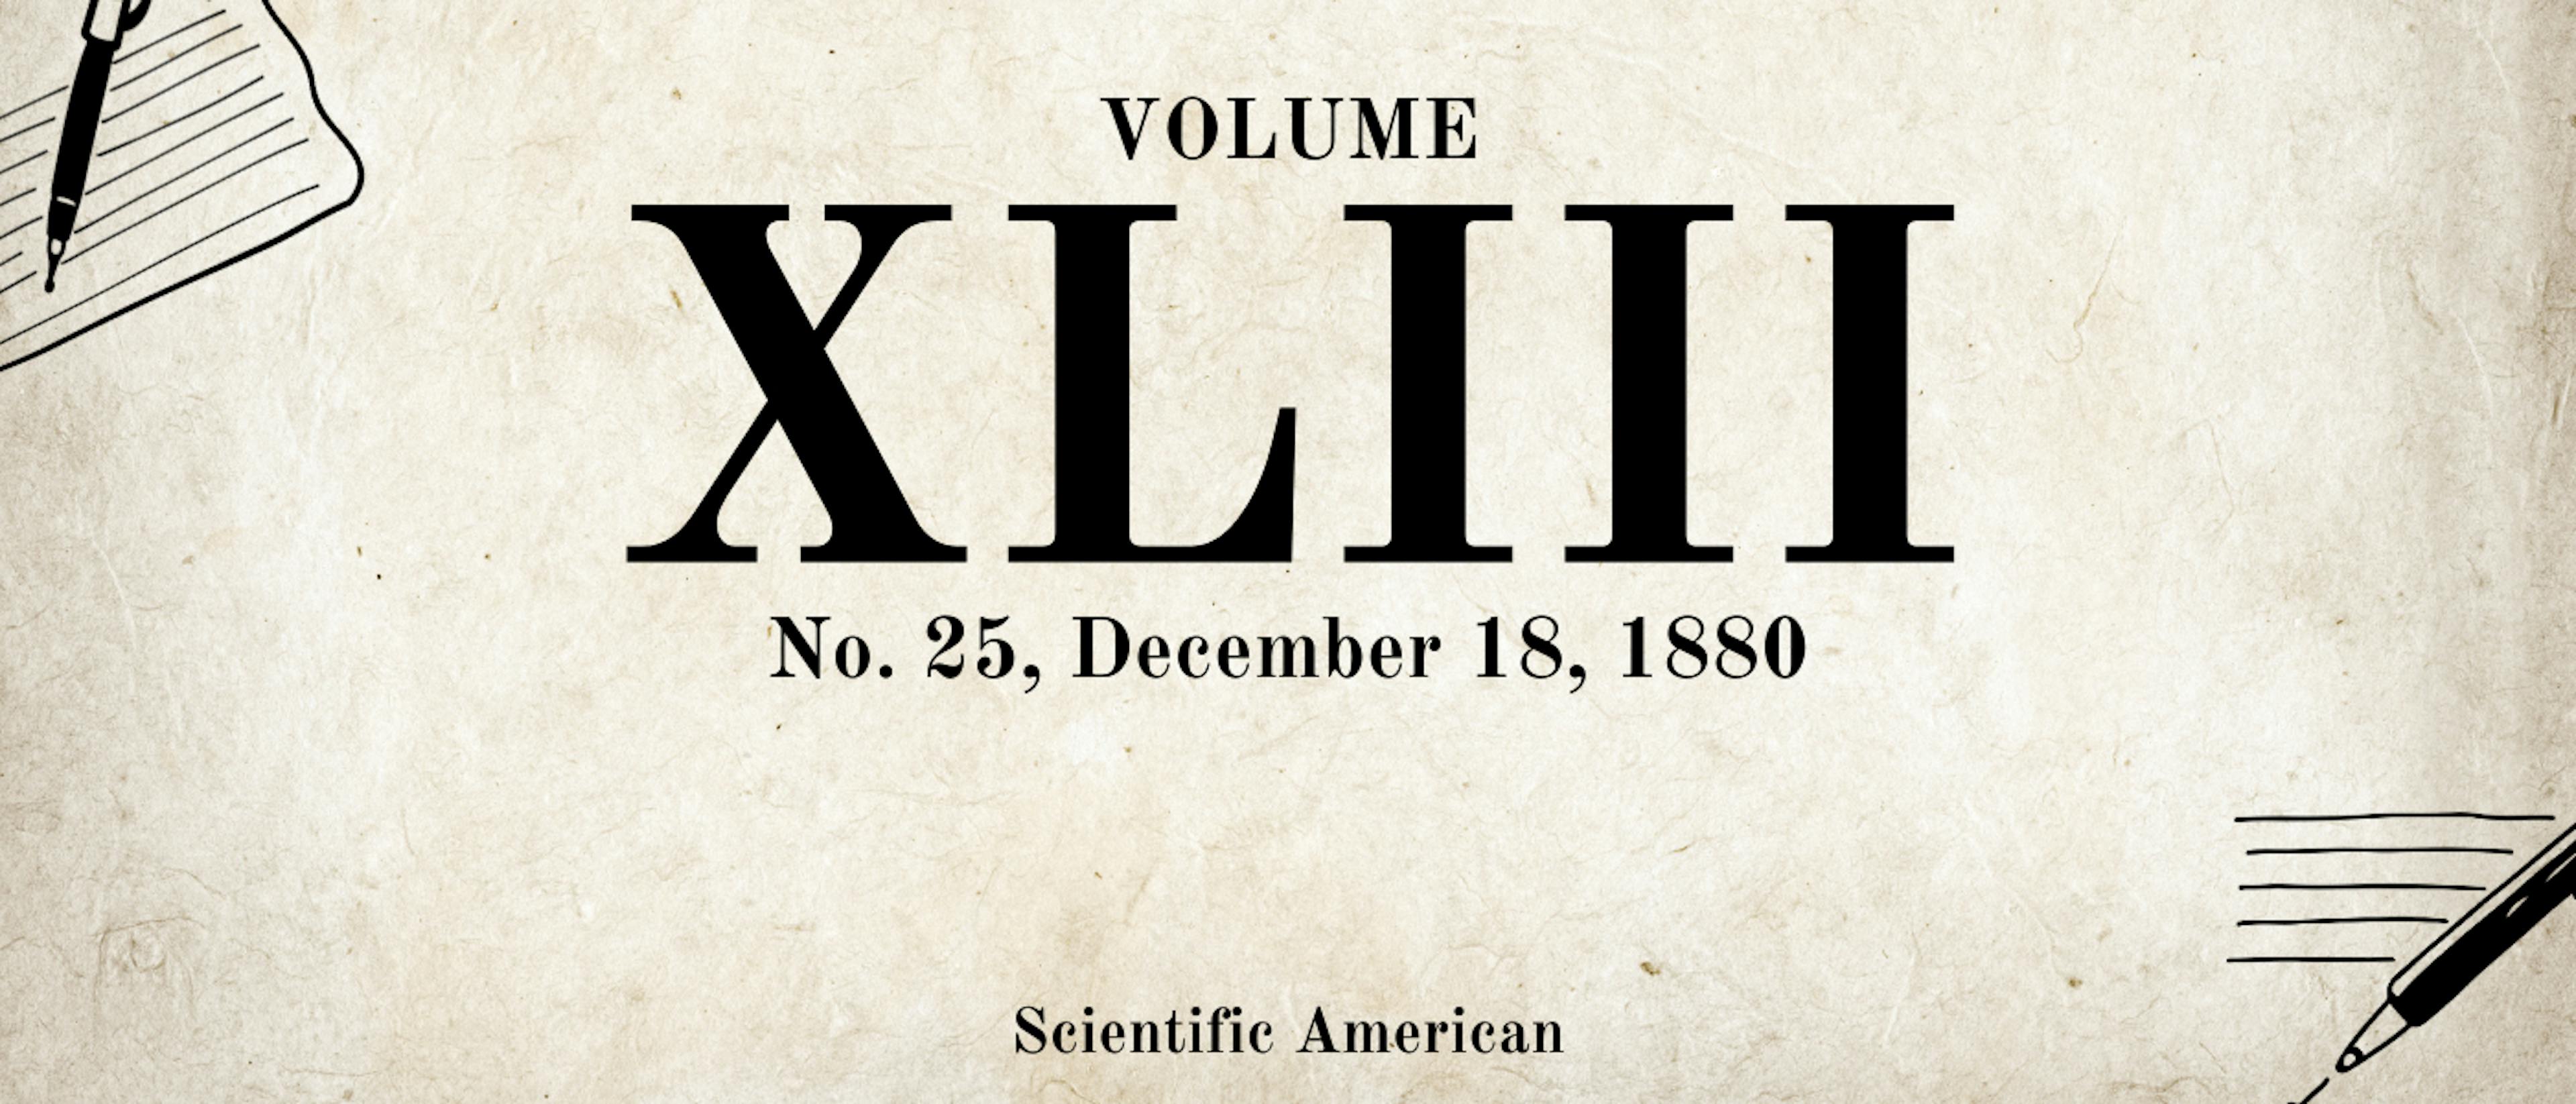 featured image - Scientific American, Volume XLIII., No. 25, December 18, 1880, by Various - Table of Links